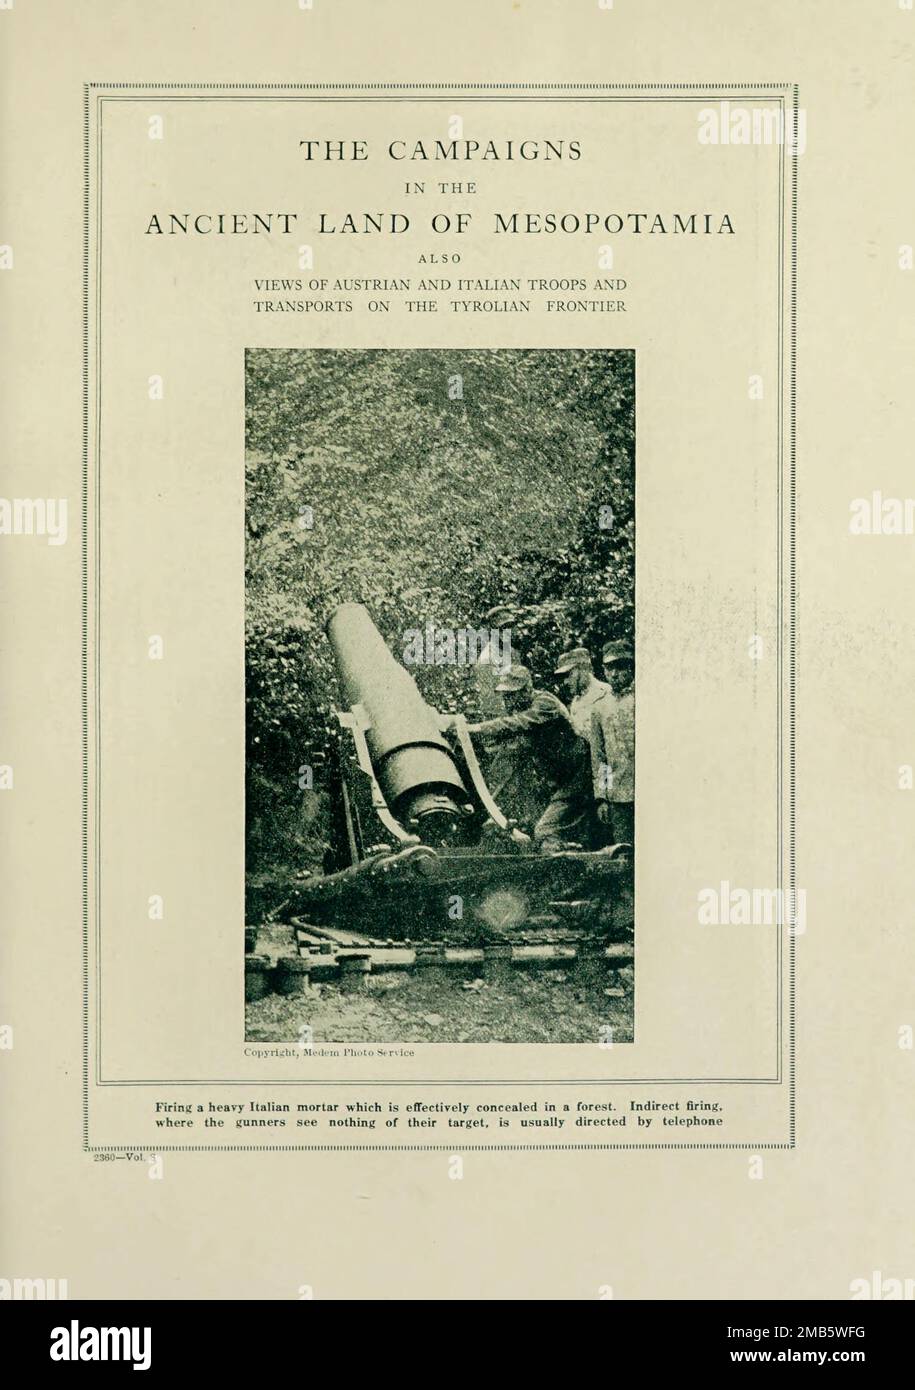 Italian Heavy Mortar Hidden in the Forest from the book The story of the great war; the complete historical records of events to date DIPLOMATIC AND STATE PAPERS by Reynolds, Francis Joseph, 1867-1937; Churchill, Allen Leon; Miller, Francis Trevelyan, 1877-1959; Wood, Leonard, 1860-1927; Knight, Austin Melvin, 1854-1927; Palmer, Frederick, 1873-1958; Simonds, Frank Herbert, 1878-; Ruhl, Arthur Brown, 1876-  Volume VIII Published 1920 Stock Photo